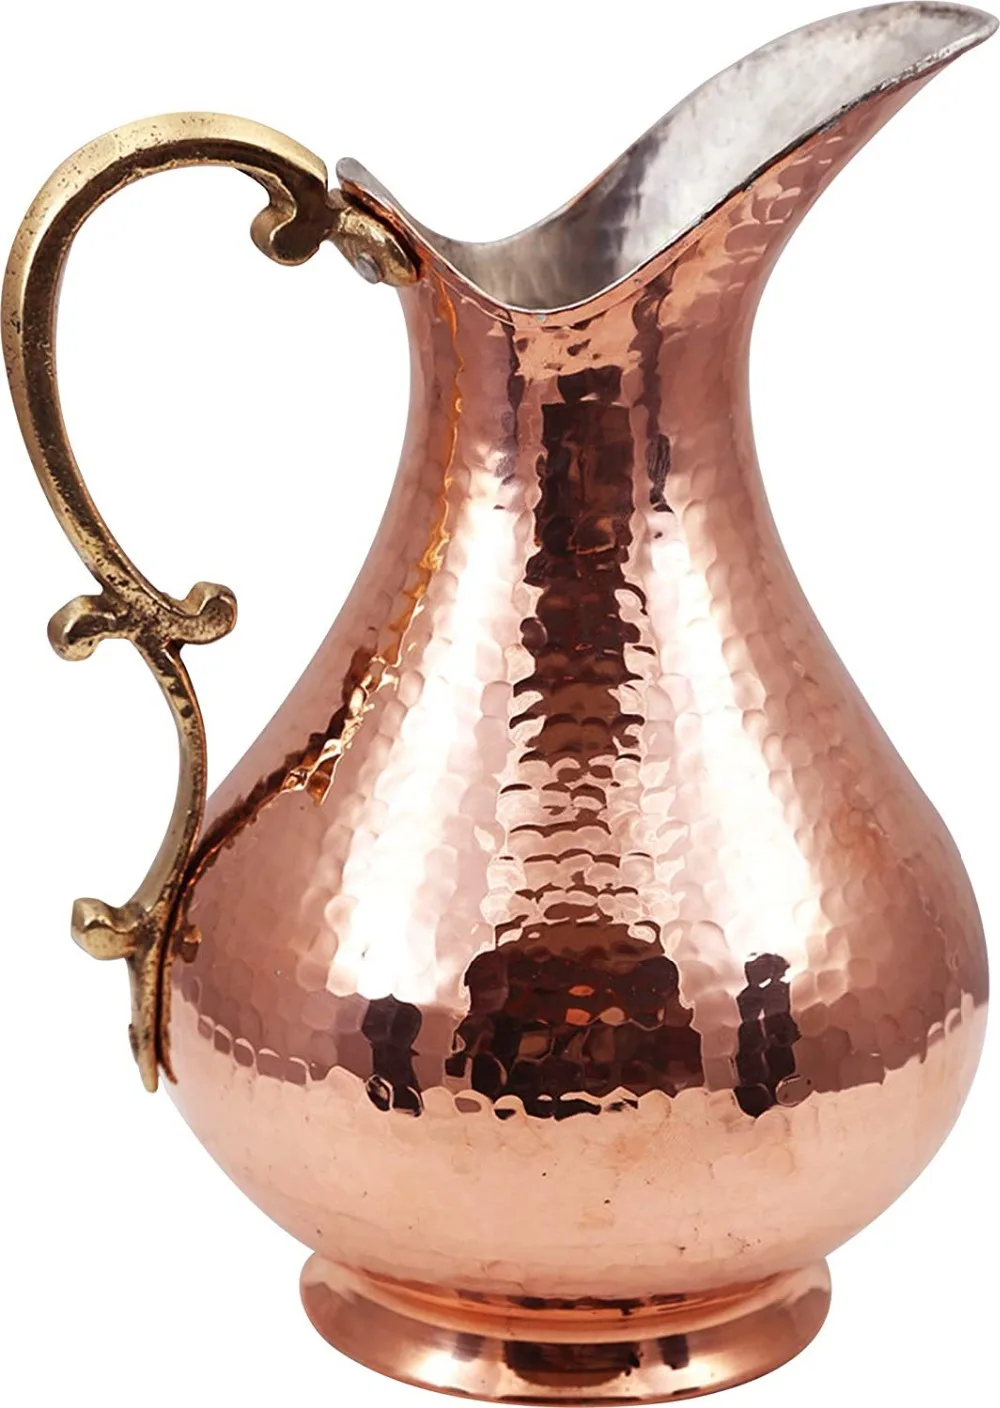 1- Premium Quality Copper Wine Pitcher Water Jug Wine Jug Pure Copper Pitcher Carafe Handmade , Hand Hammered Made in Turkey Drinkware 2 Lt (70 fl oz) Cristmas Gift Box Hand Carved Hand Crafted